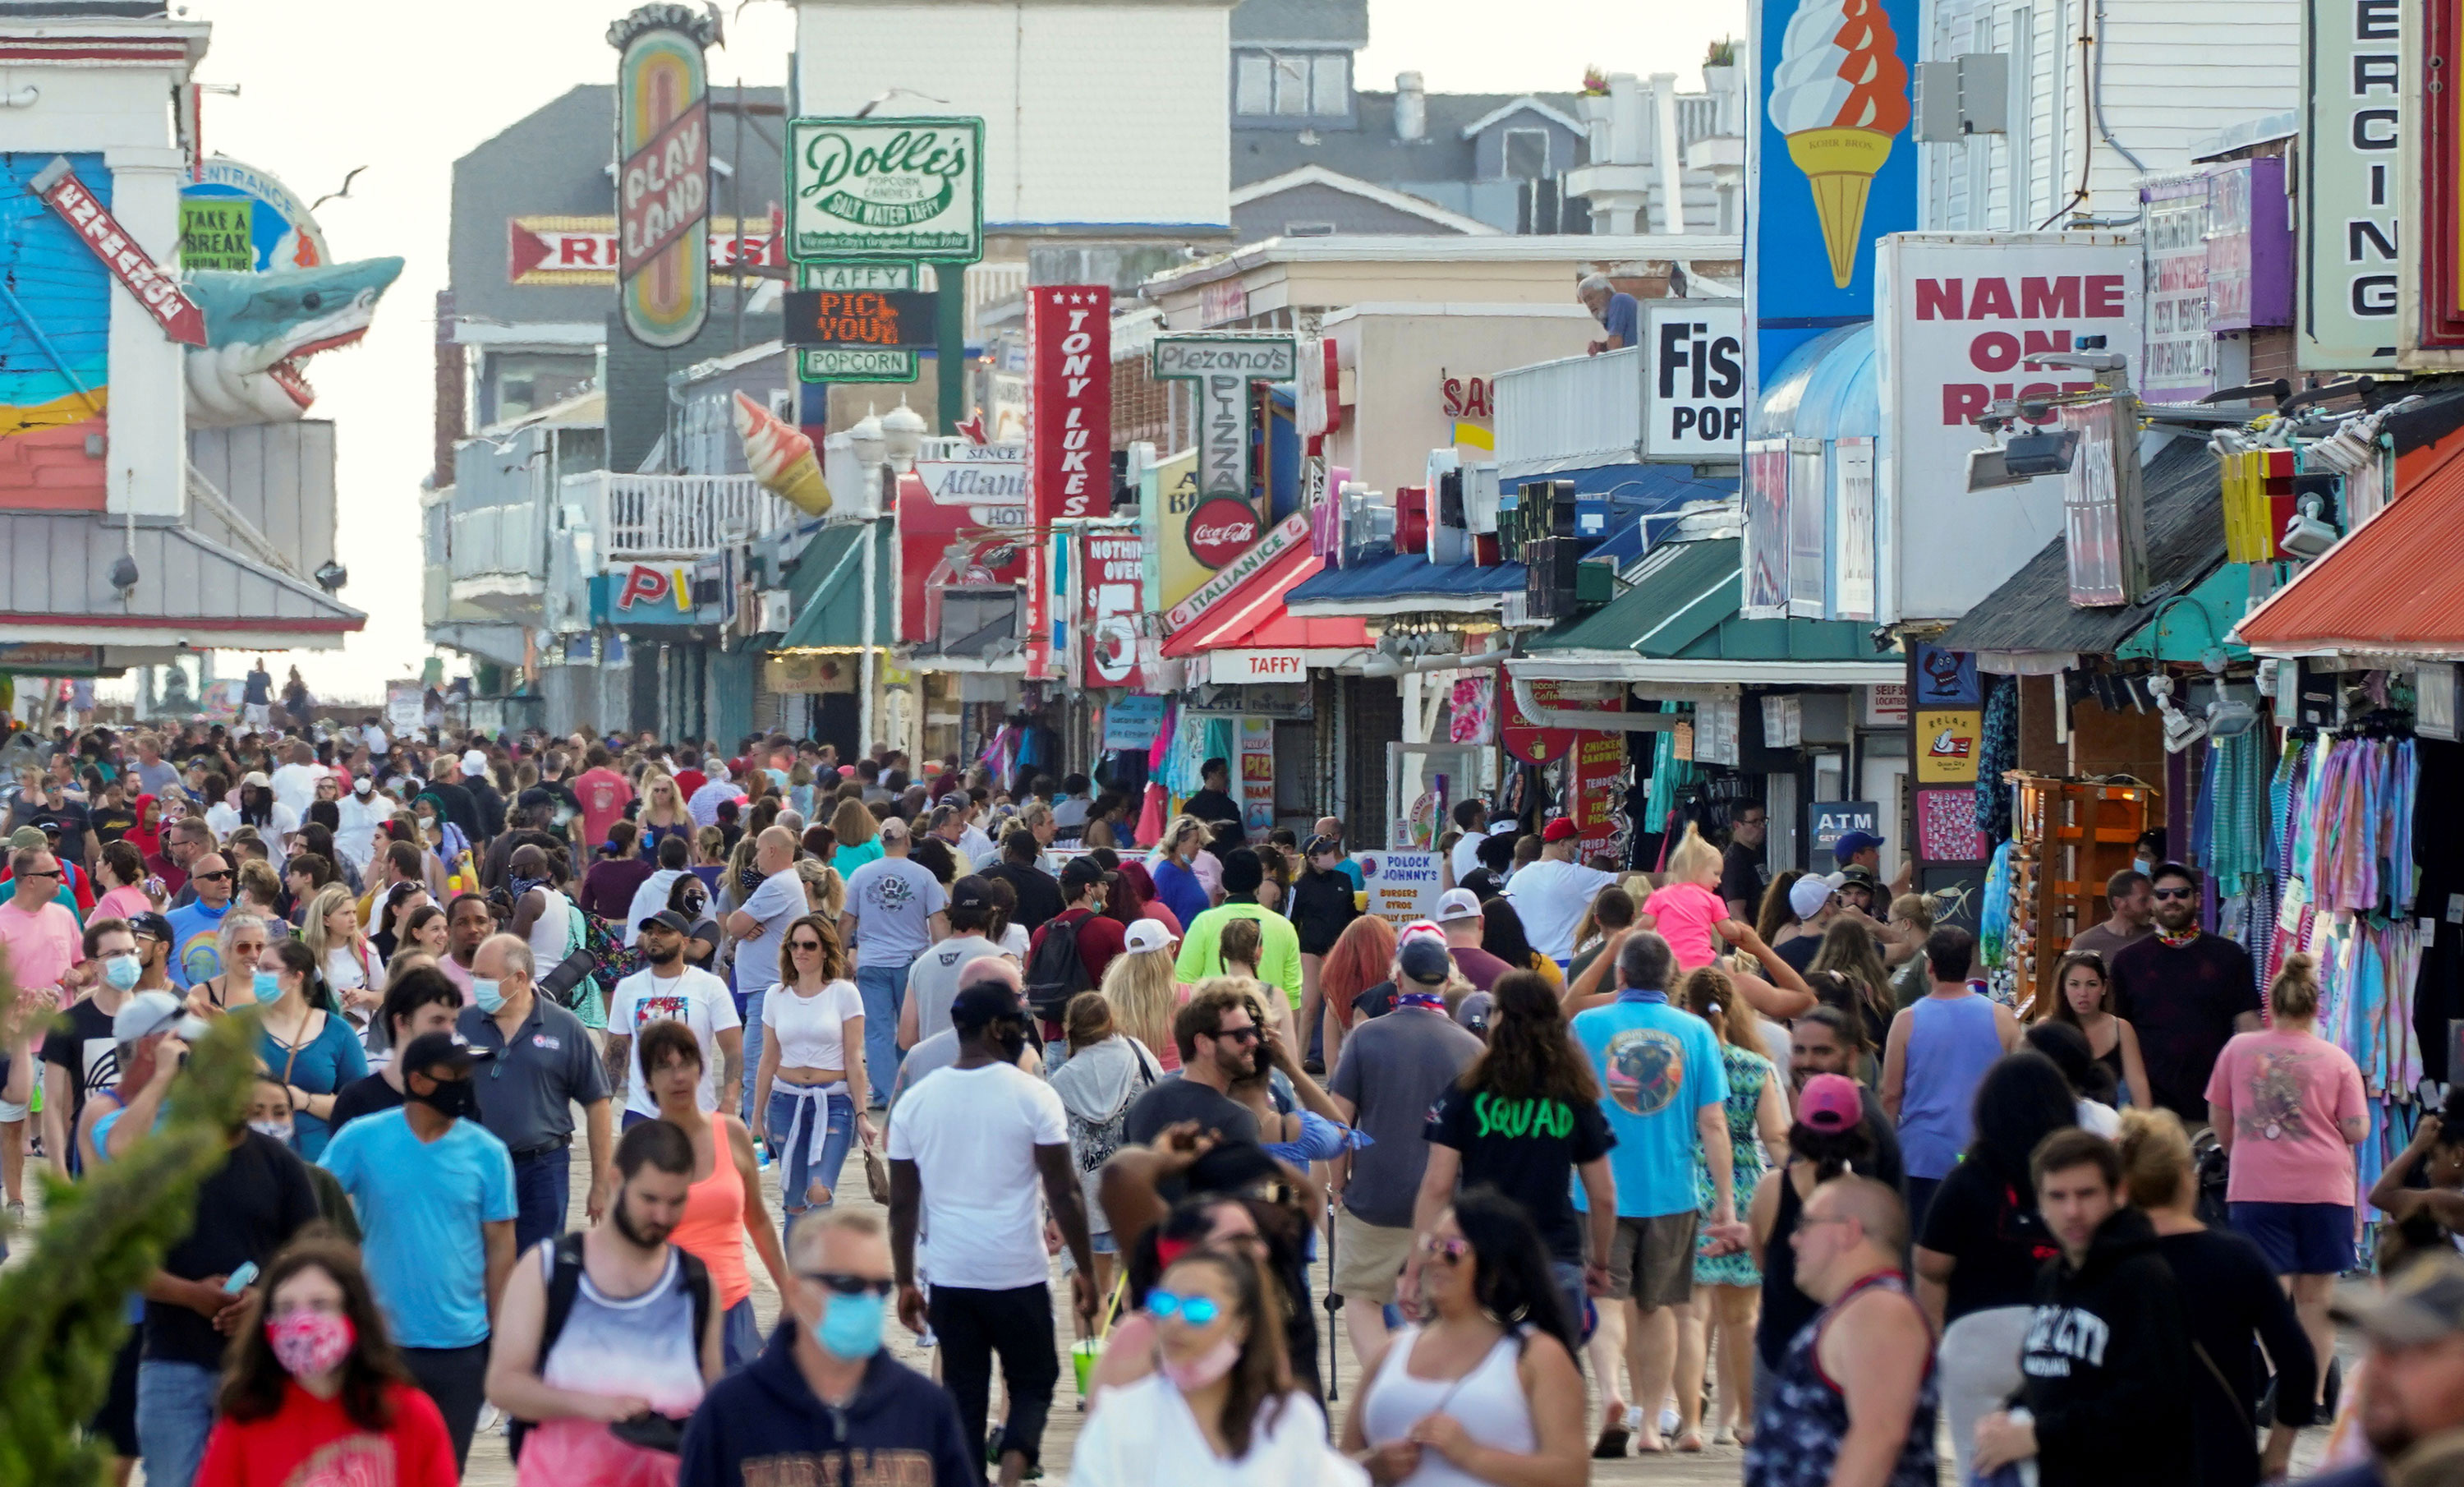 With the relaxing of coronavirus restrictions, visitors crowd the boardwalk on Memorial Day weekend in Ocean City, Maryland.